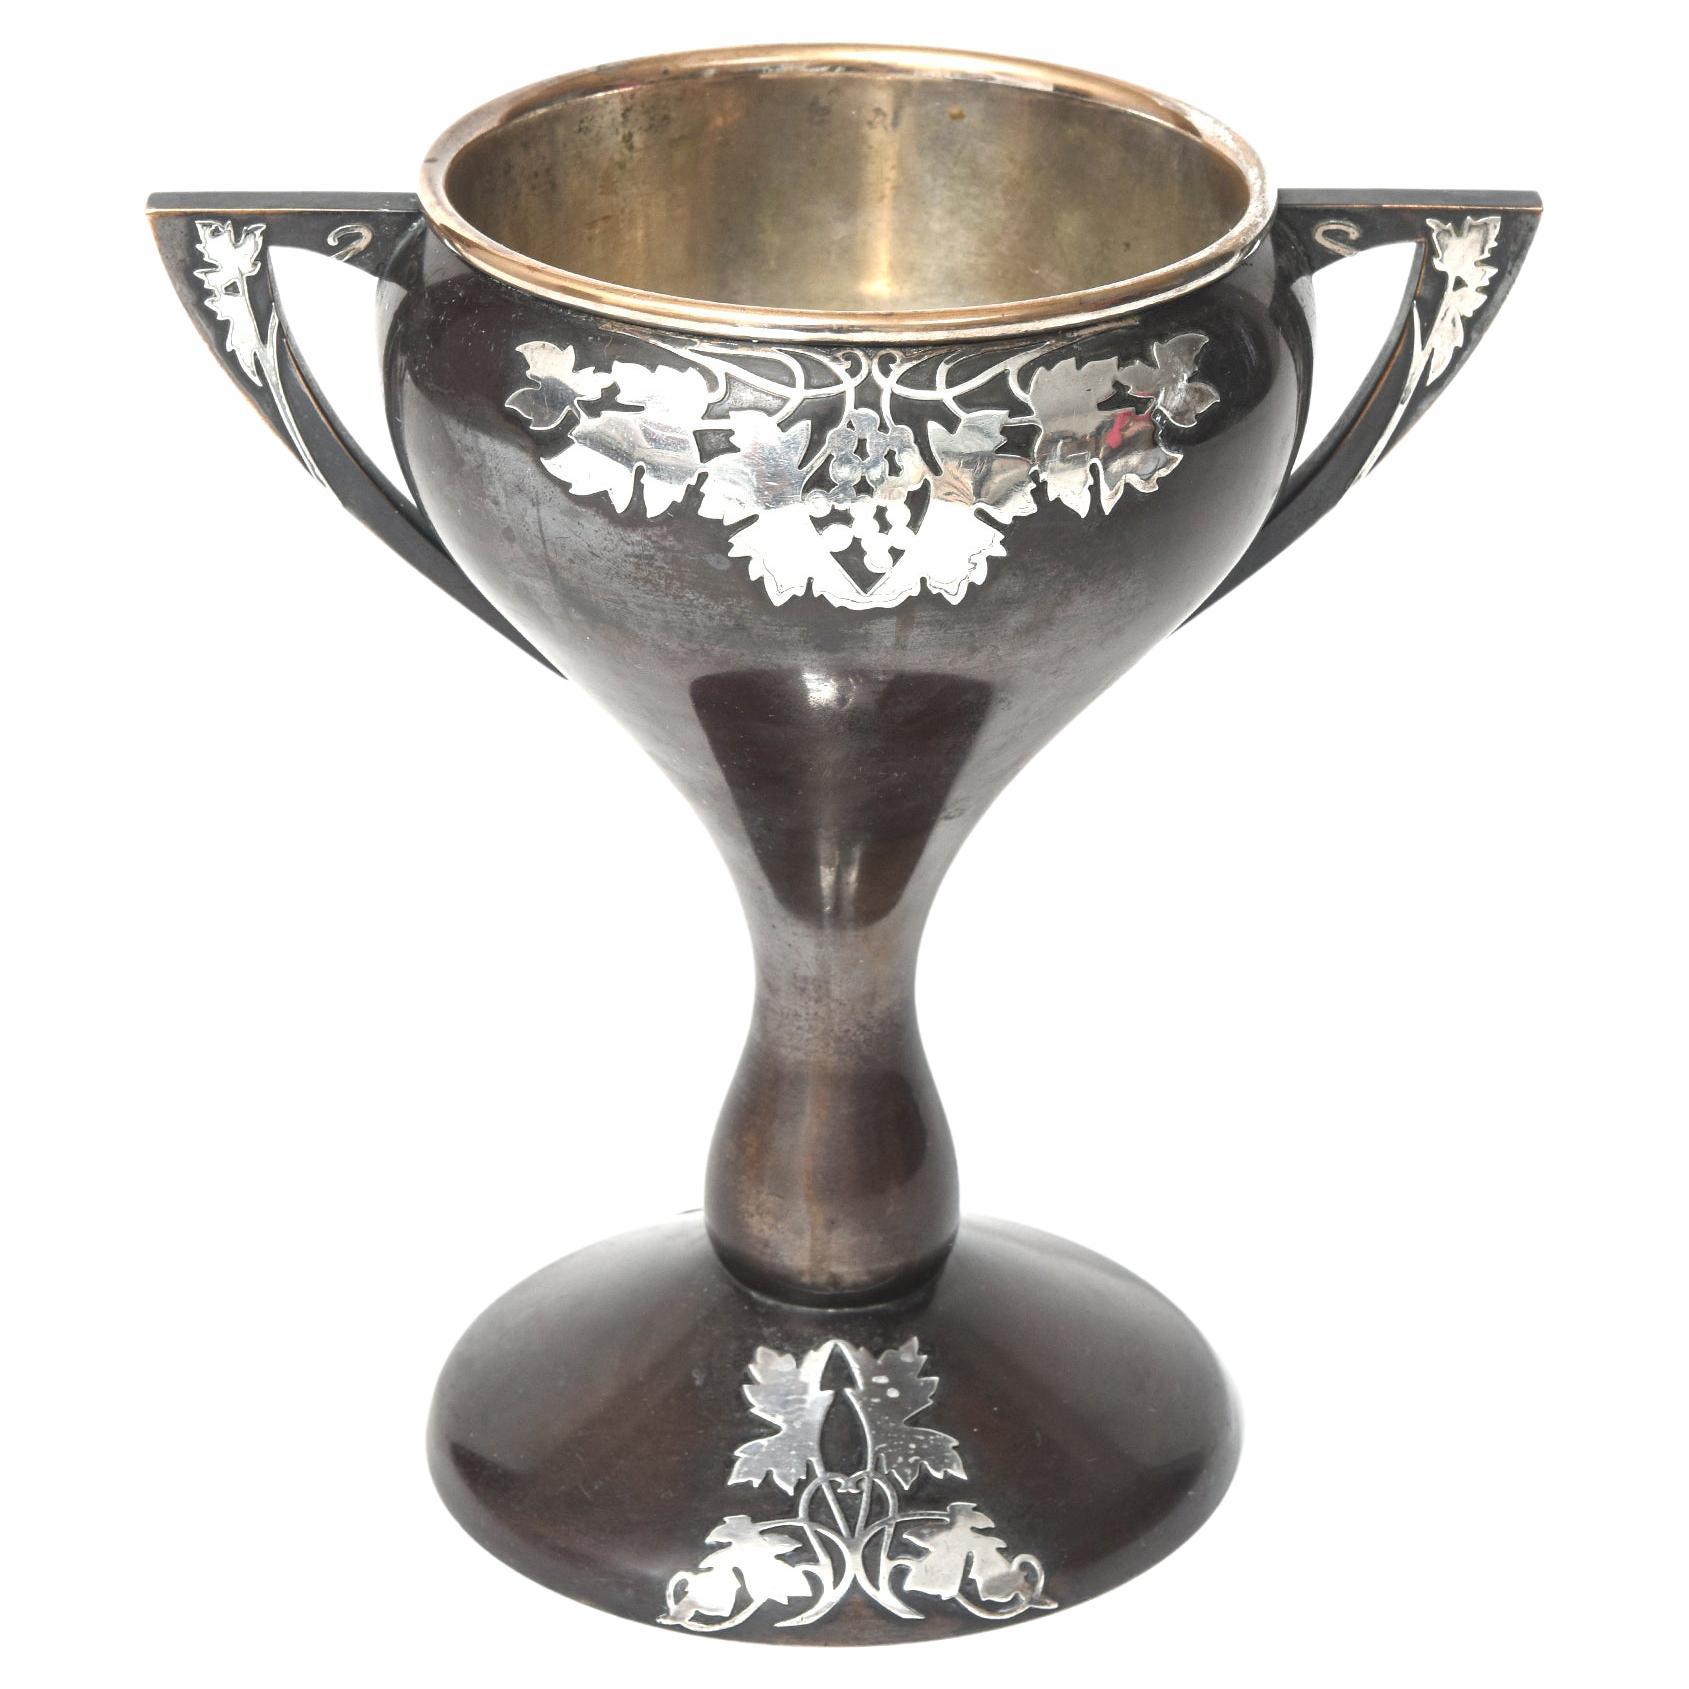 Heintz Arts & Crafts Sterling Overlay on Bronze Mixed Metals Trophy Loving Cup